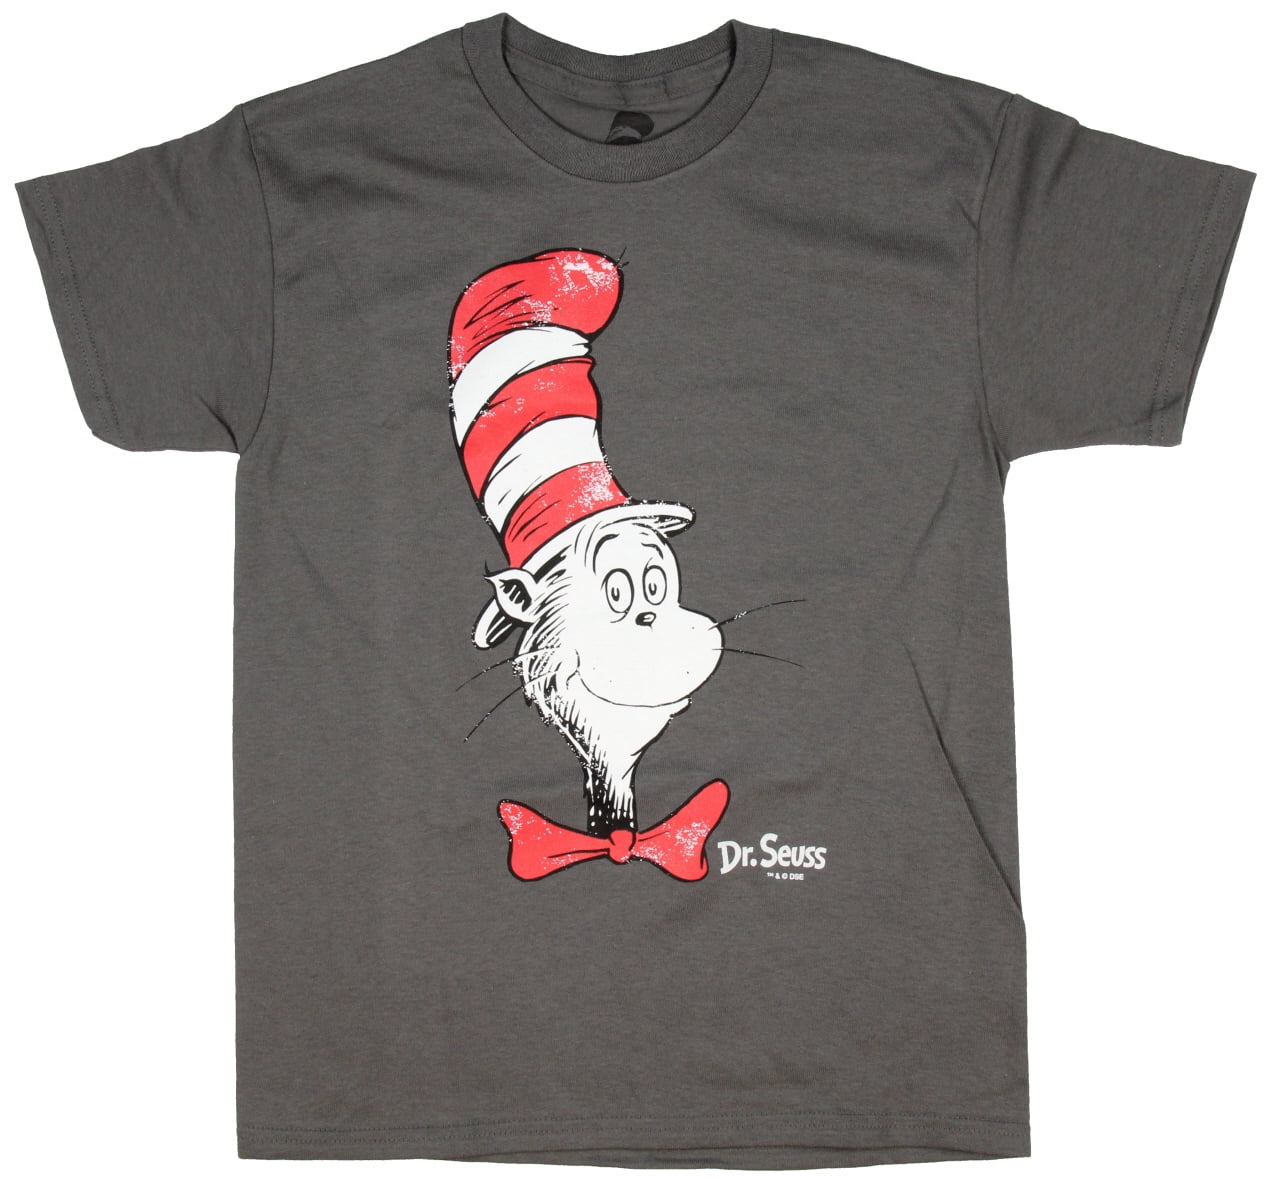 Dr. Seuss - Dr. Seuss Boys' Youth The Cat in the Hat Distressed ...